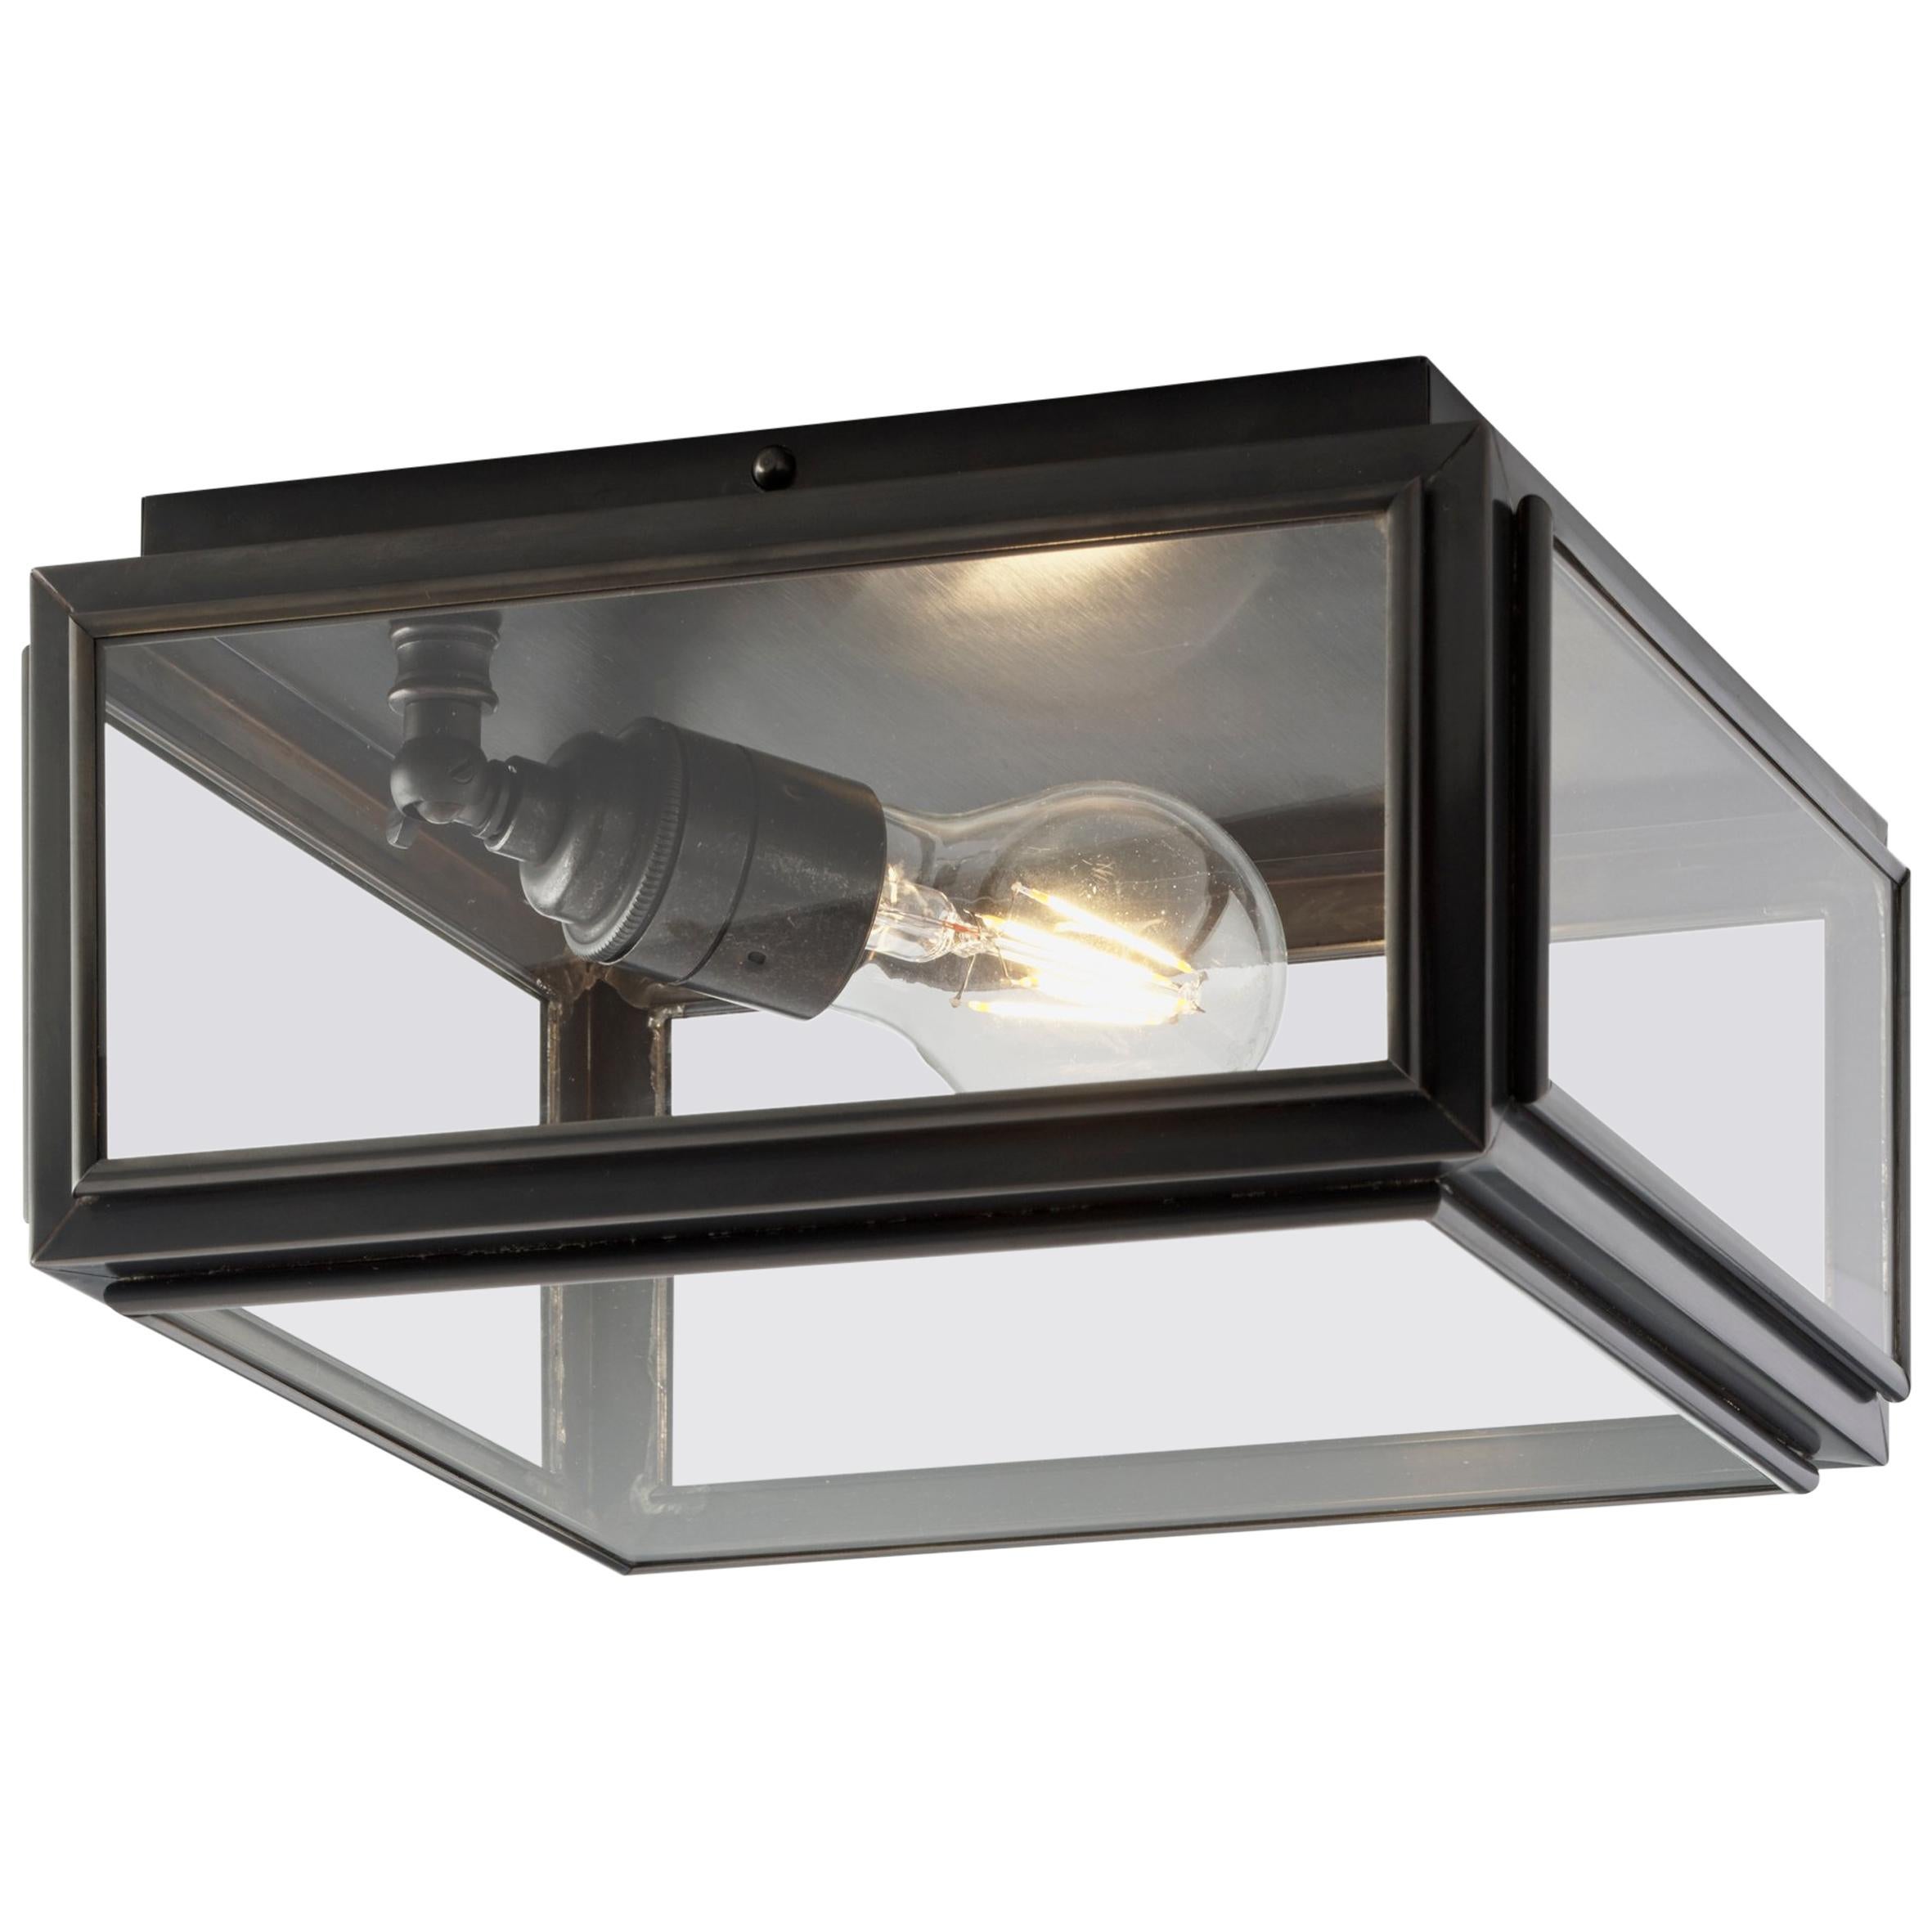 Tekna Chelsea Medium Ceiling Light with Dark Bronze Finish and Clear Glass